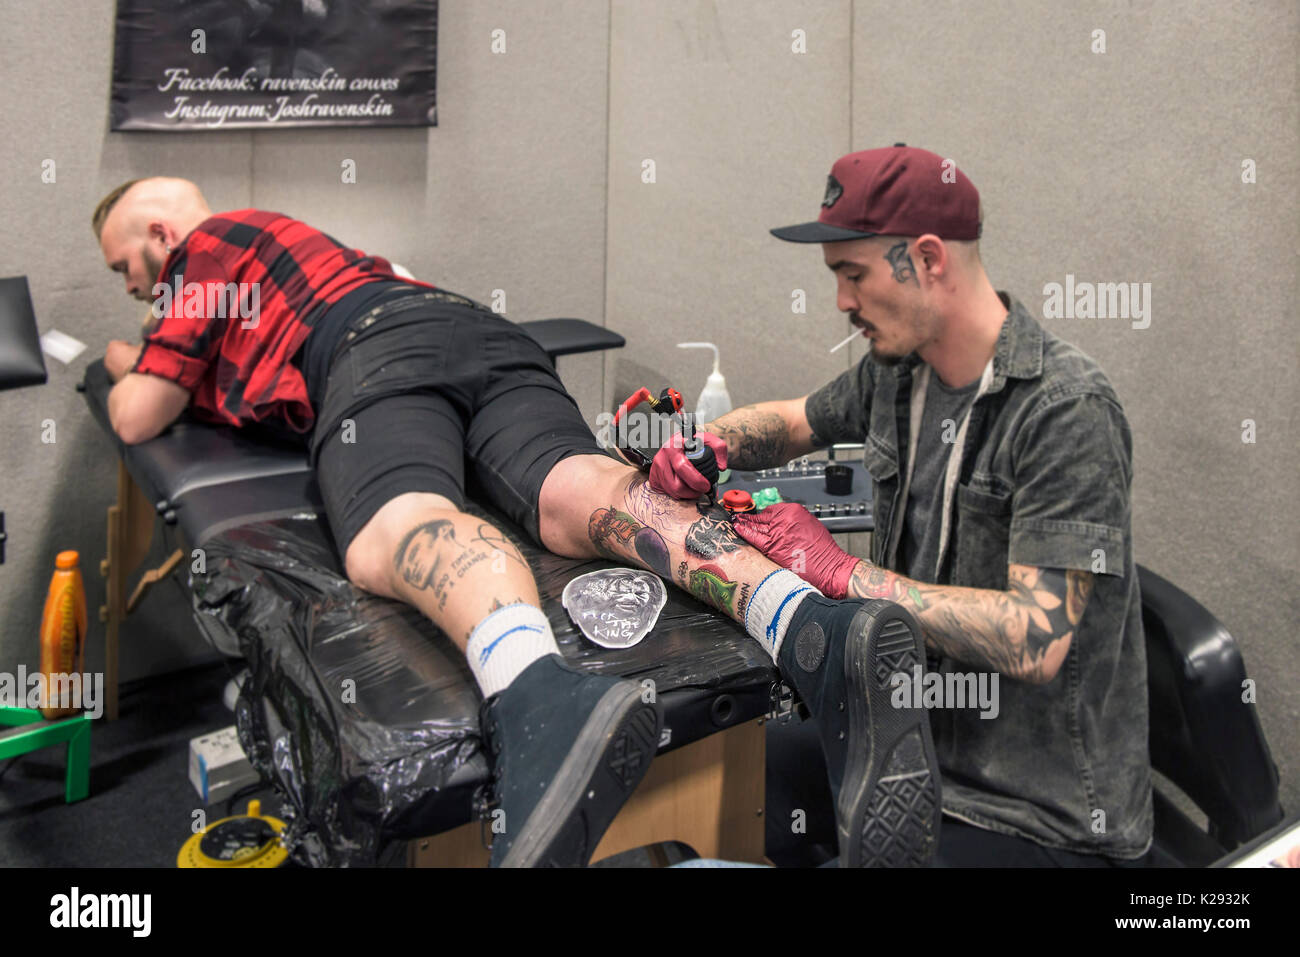 Tattoo - Josh Docksey tattooing the leg of a customer at the Cornwall Tattoo Convention. Stock Photo